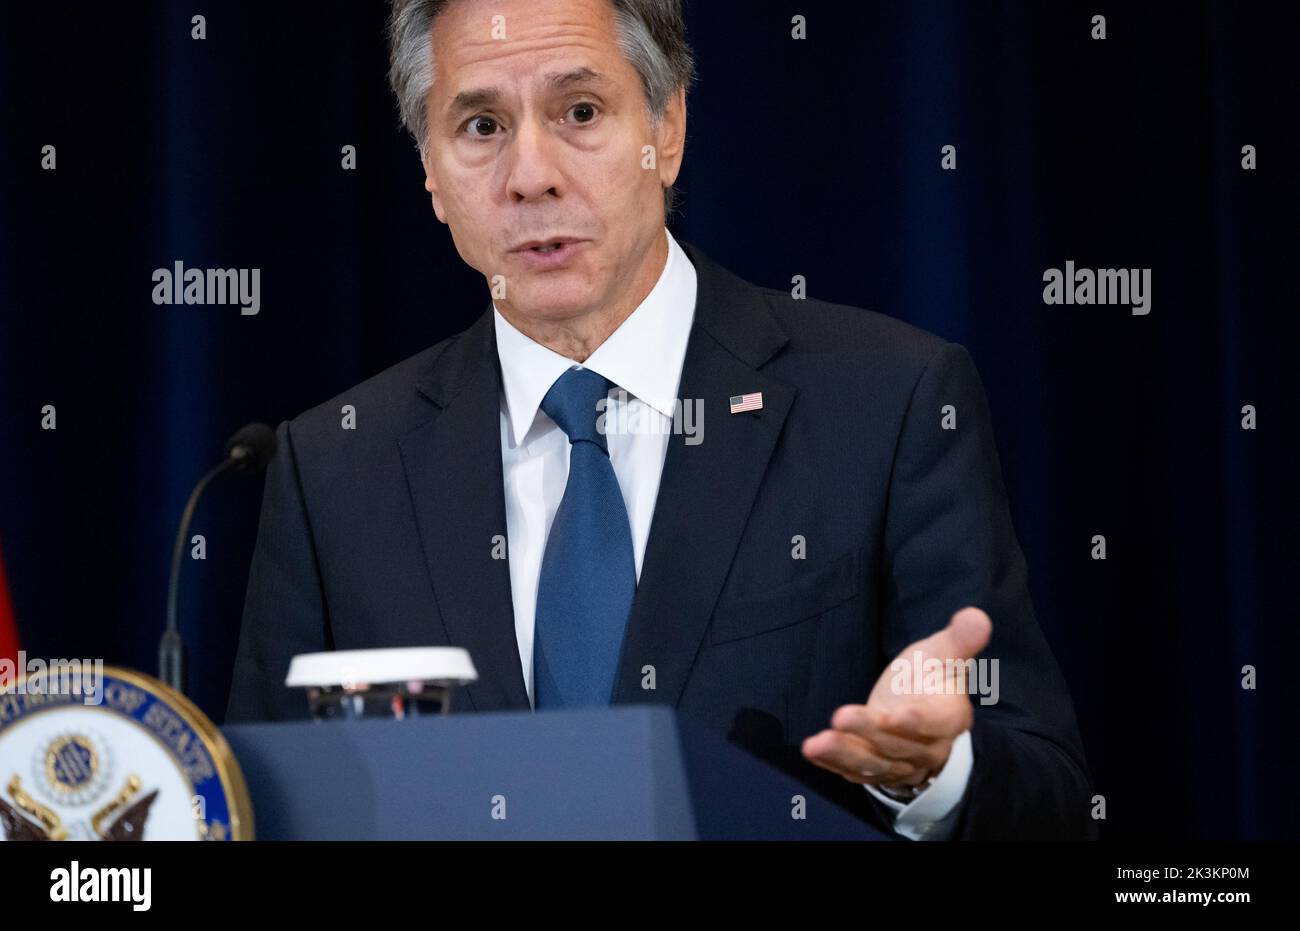 U.S. Secretary of State Antony Blinken speaks during a press conference with India's Foreign Minister Subrahmanyam Jaishankar at the State Department in Washington, U.S., September 27, 2022. Saul Loeb/Pool via REUTERS Stock Photo